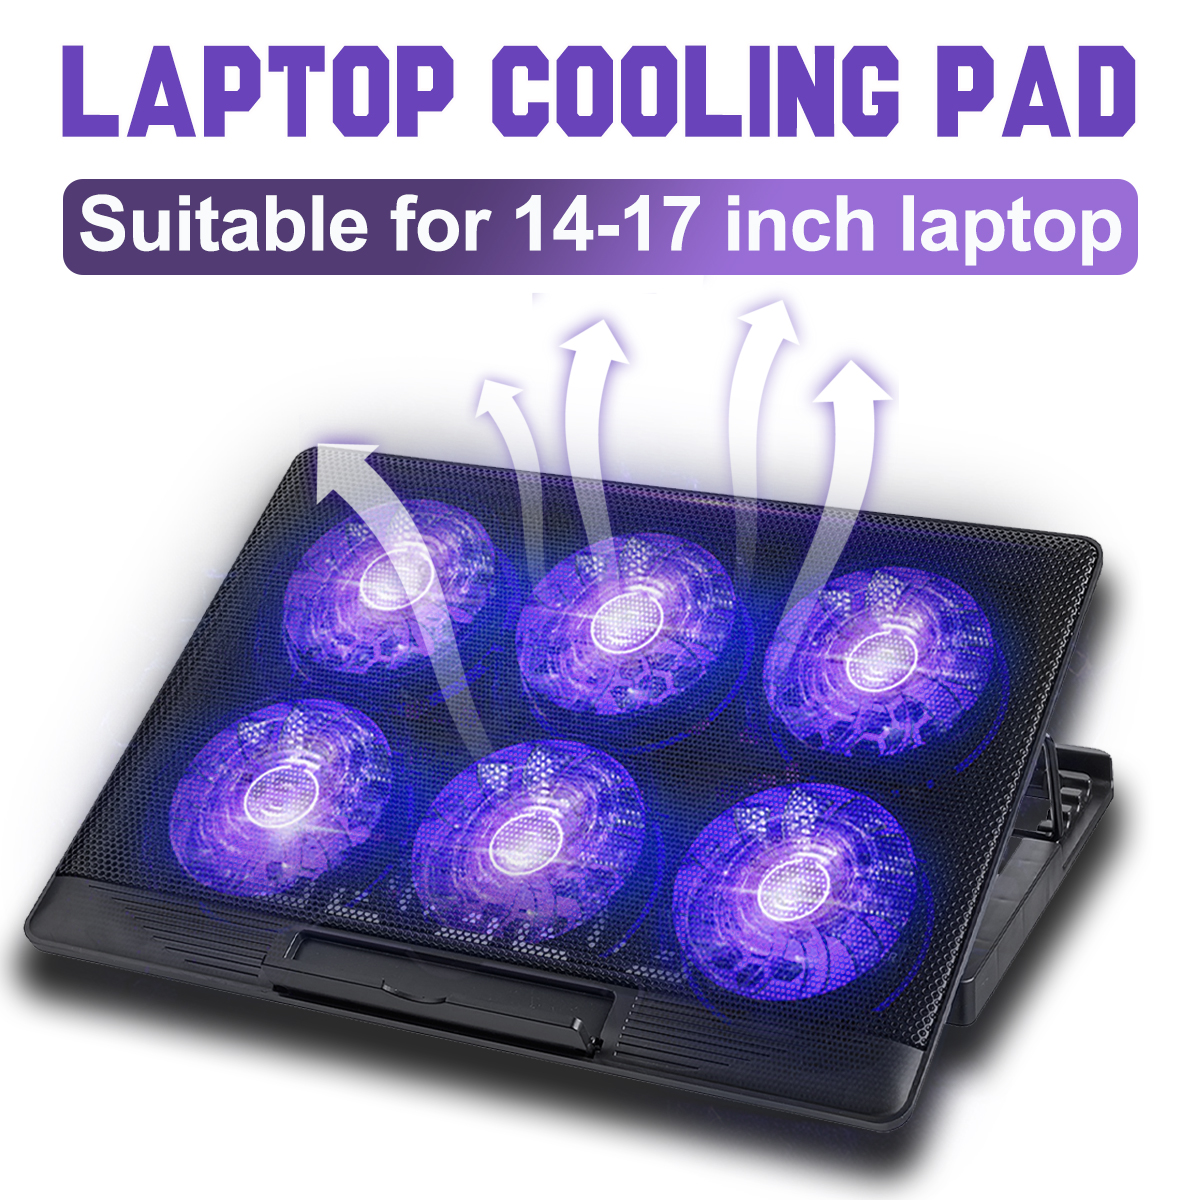 6 Fan Adjustable Laptop Cooling Pad Cooler Portable Stand For 14-17inch Laptop